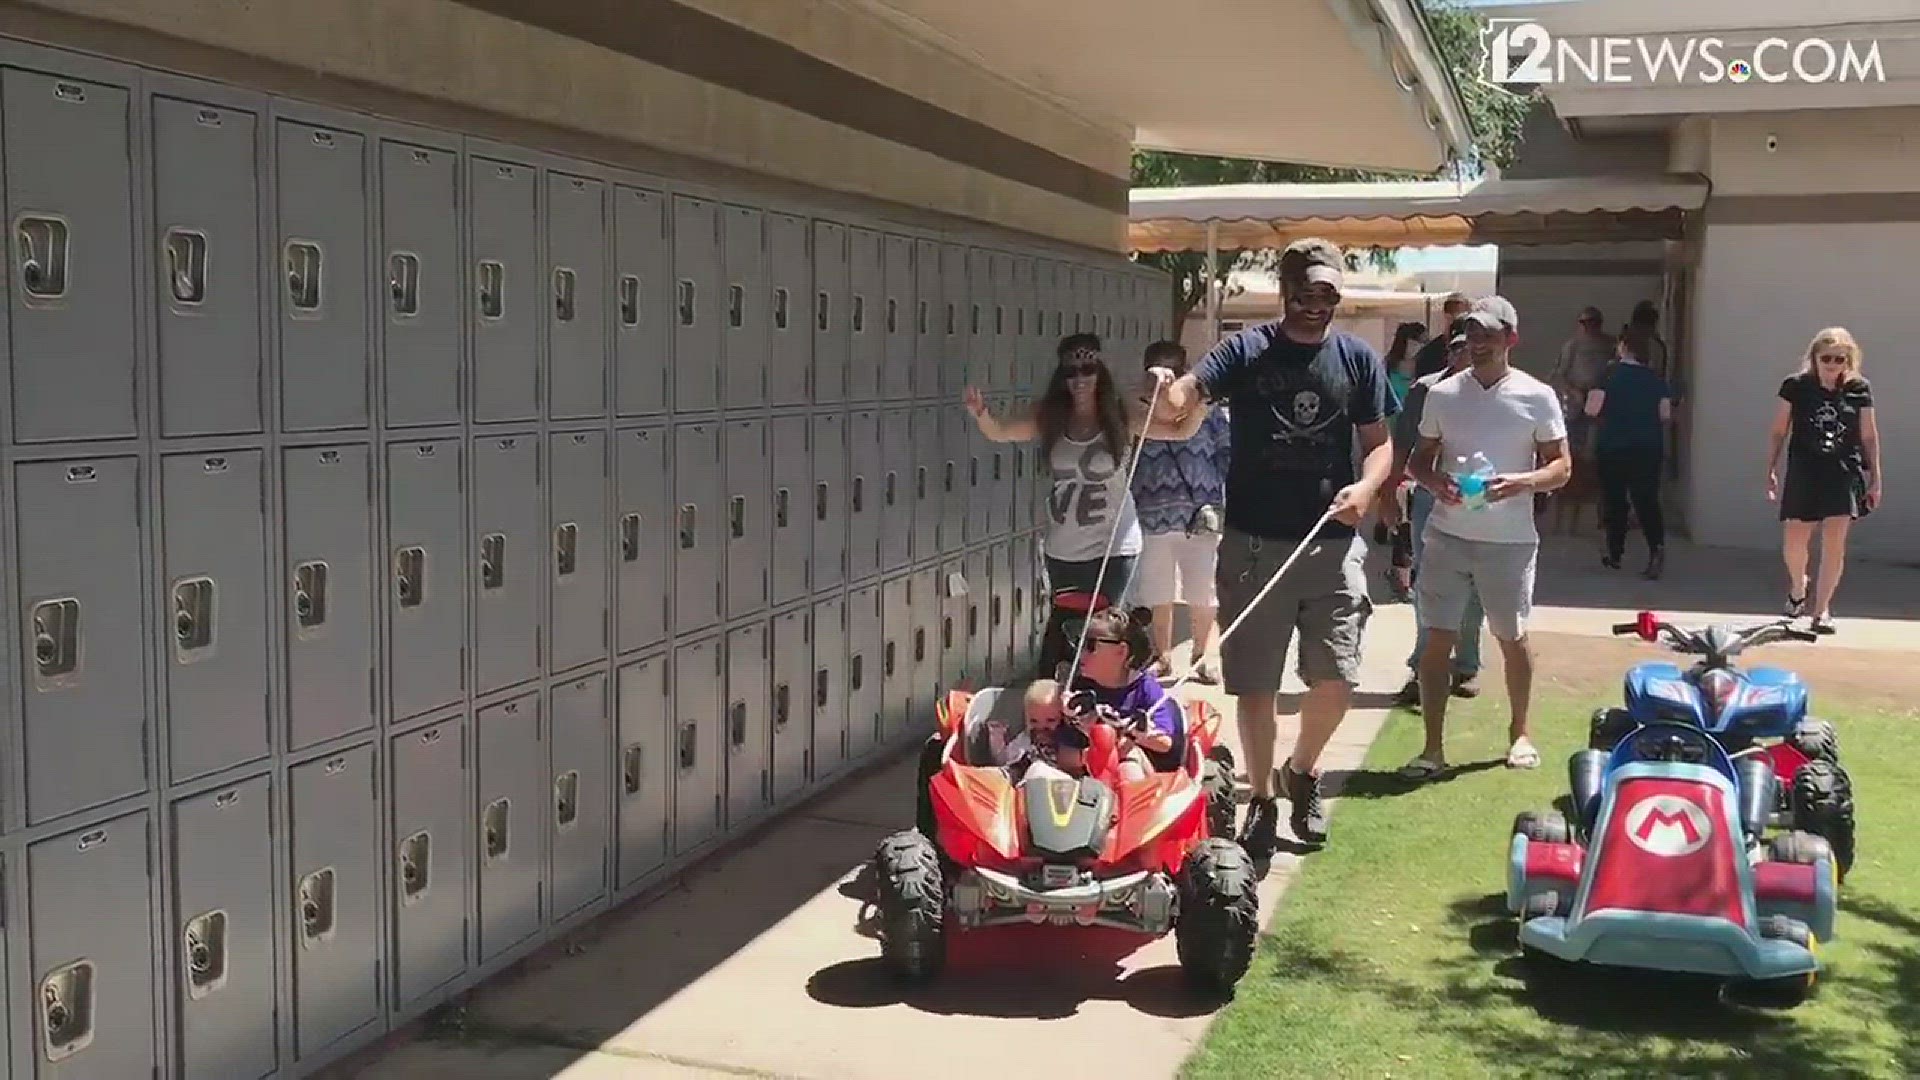 Believe Beyond Ability came up with a special event Saturday at Seton High School in Chandler. The event featured adaptive Power Wheels cars that can be driven by kids with disabilities.